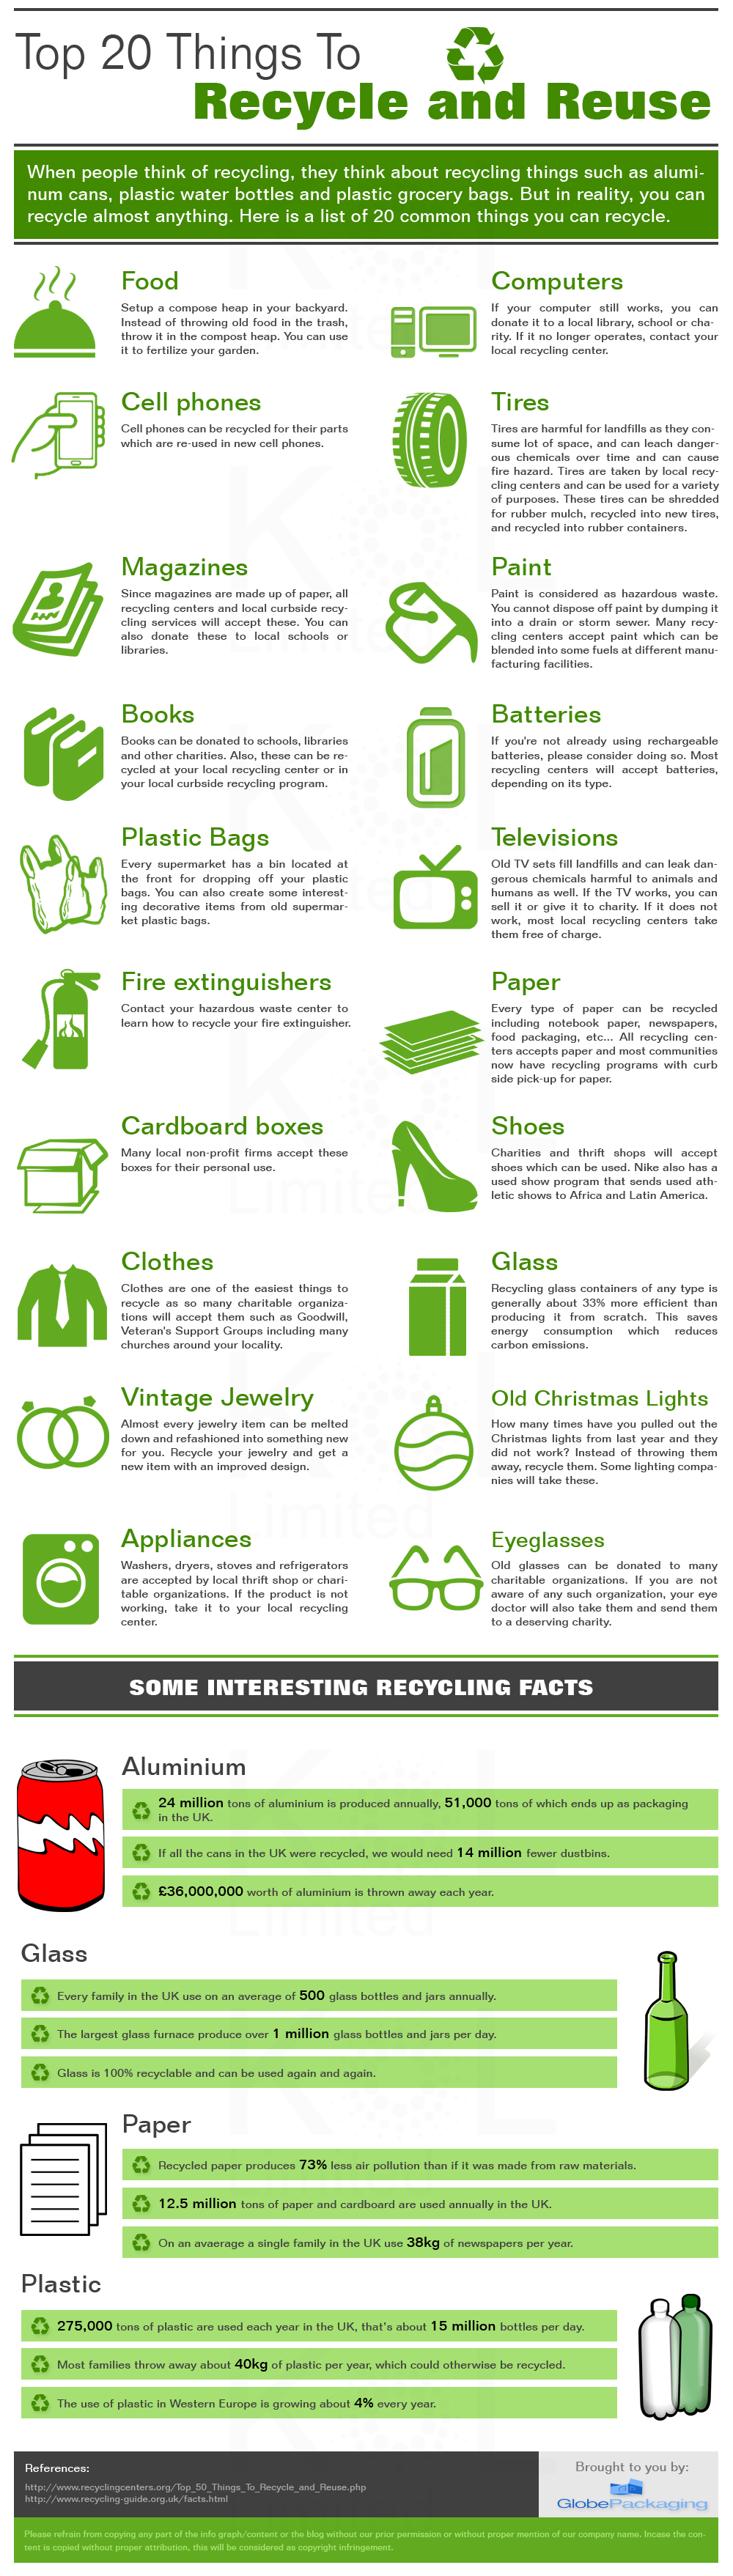 Top 20 Things to Recycle and Reuse Today [Infographic]